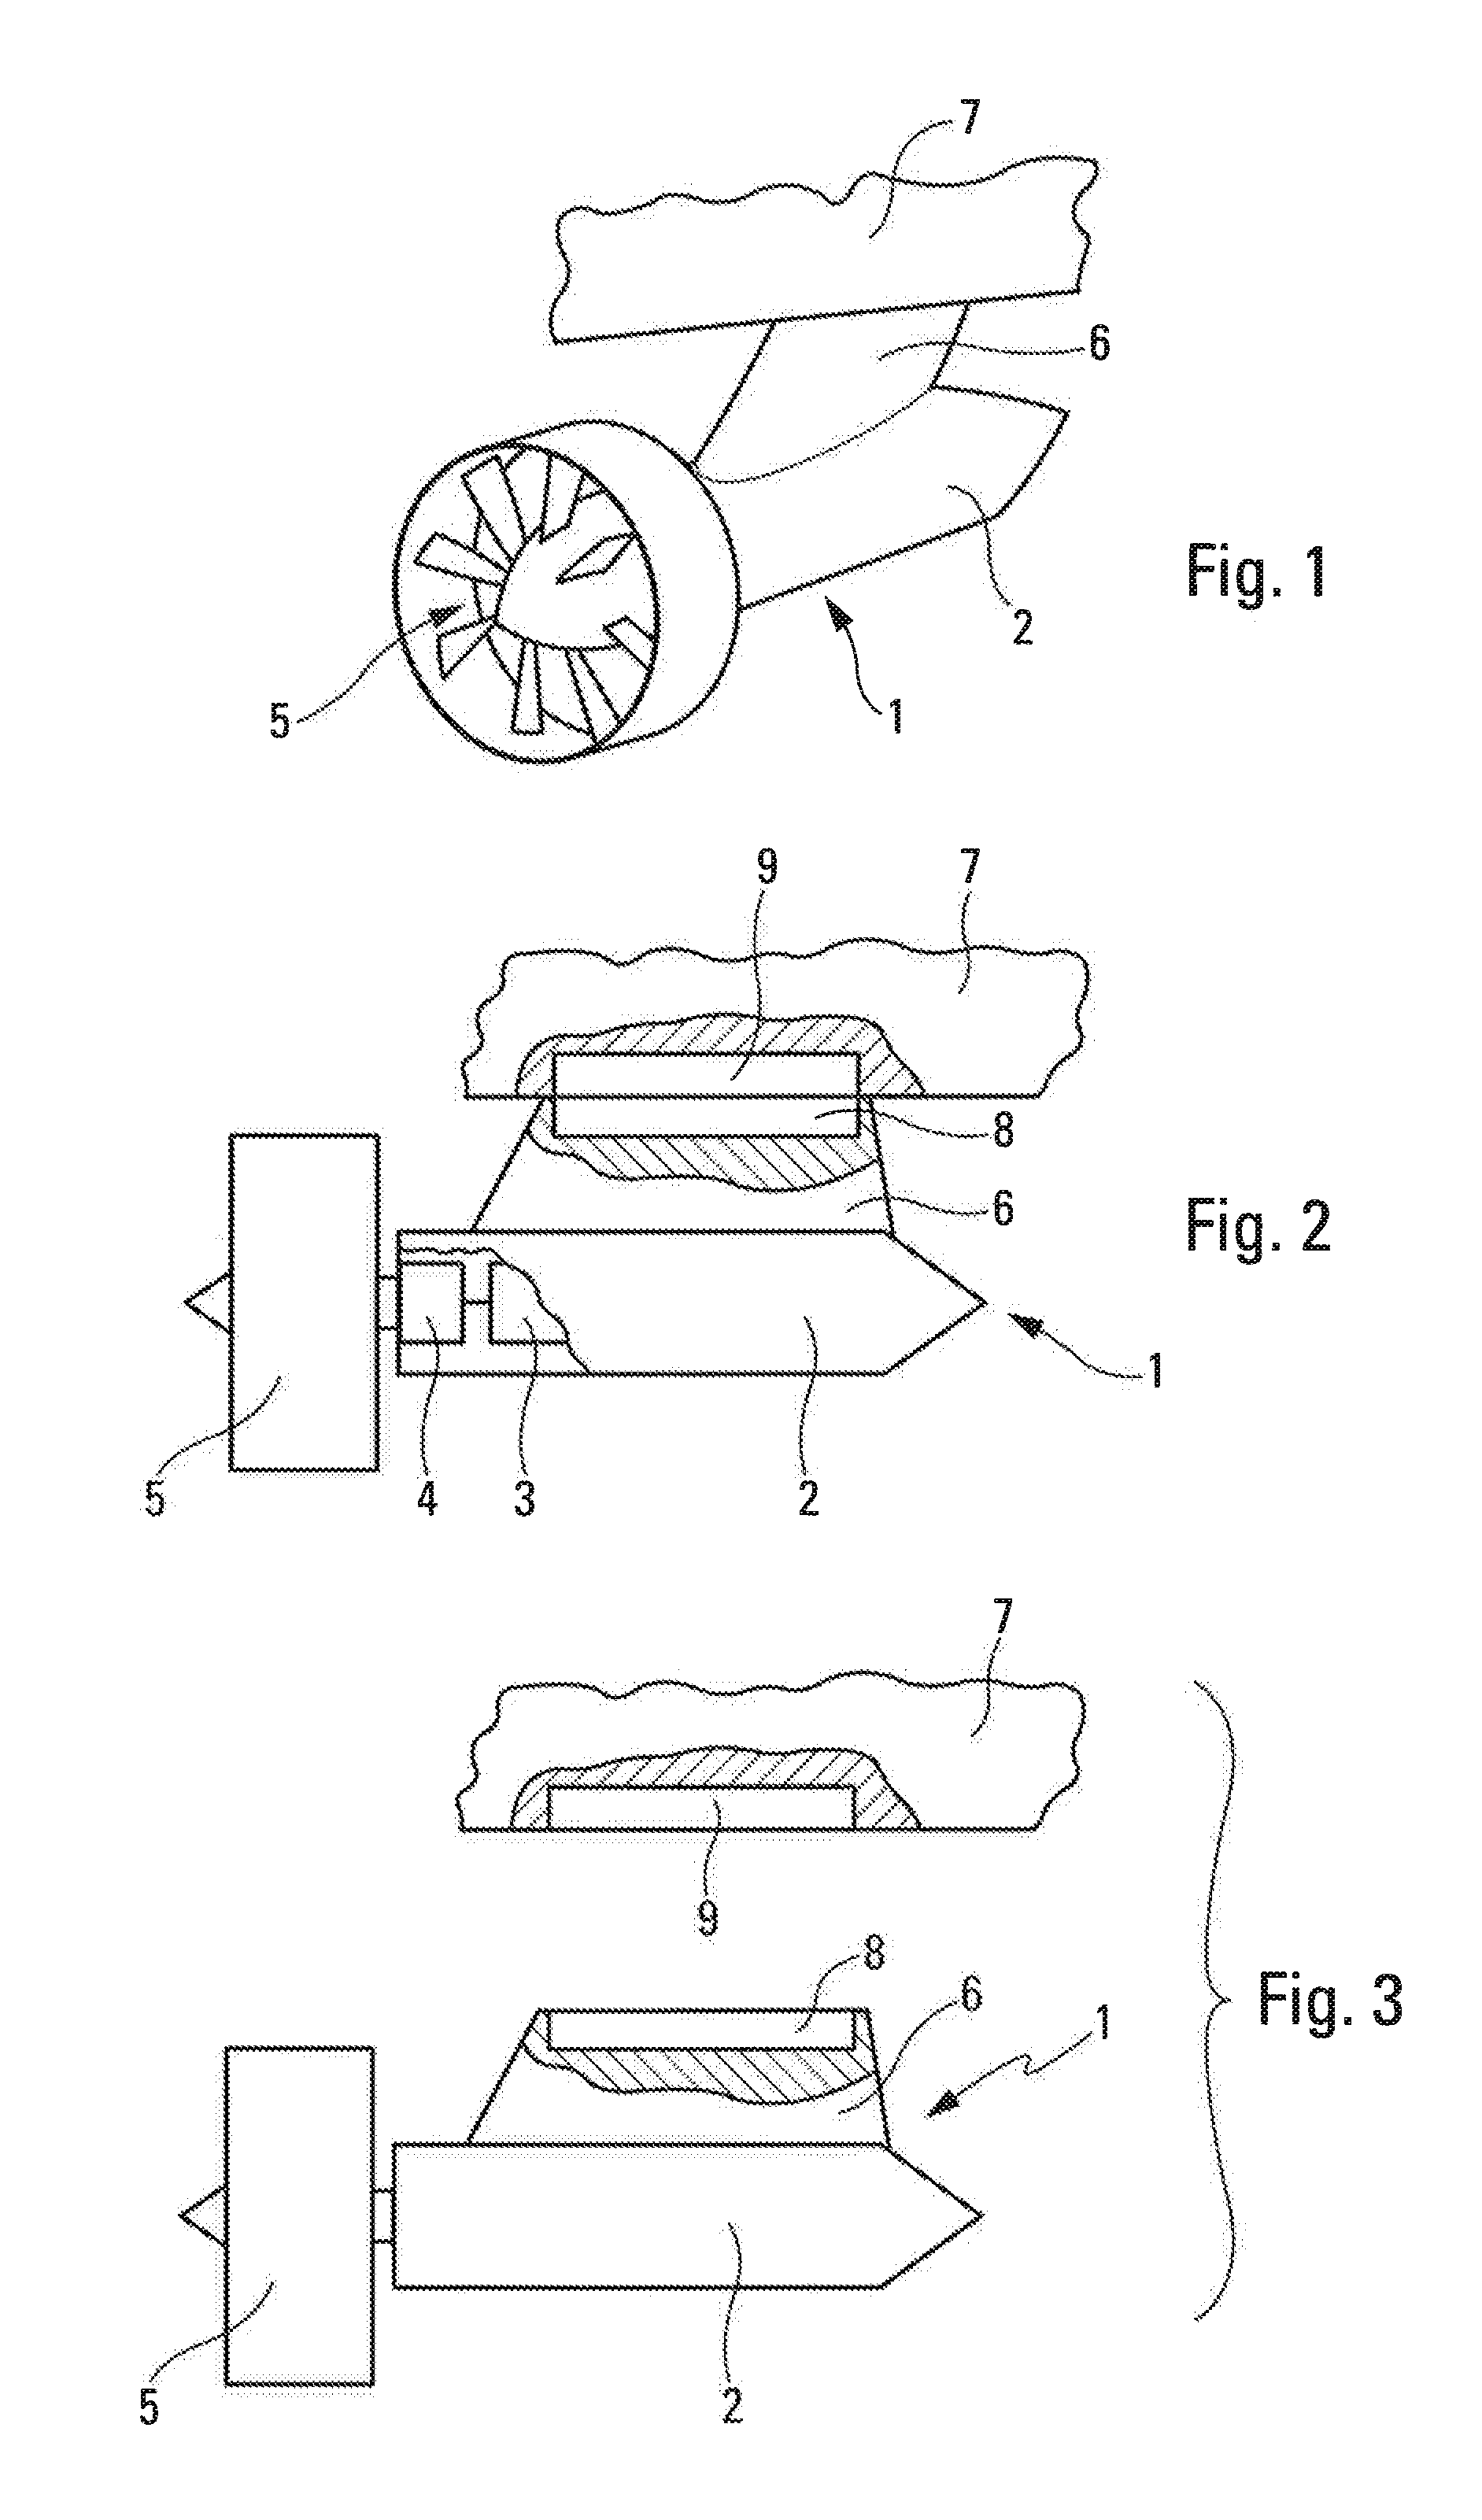 Removable auxiliary power device for aircraft and aircraft adapted to use at least one such device